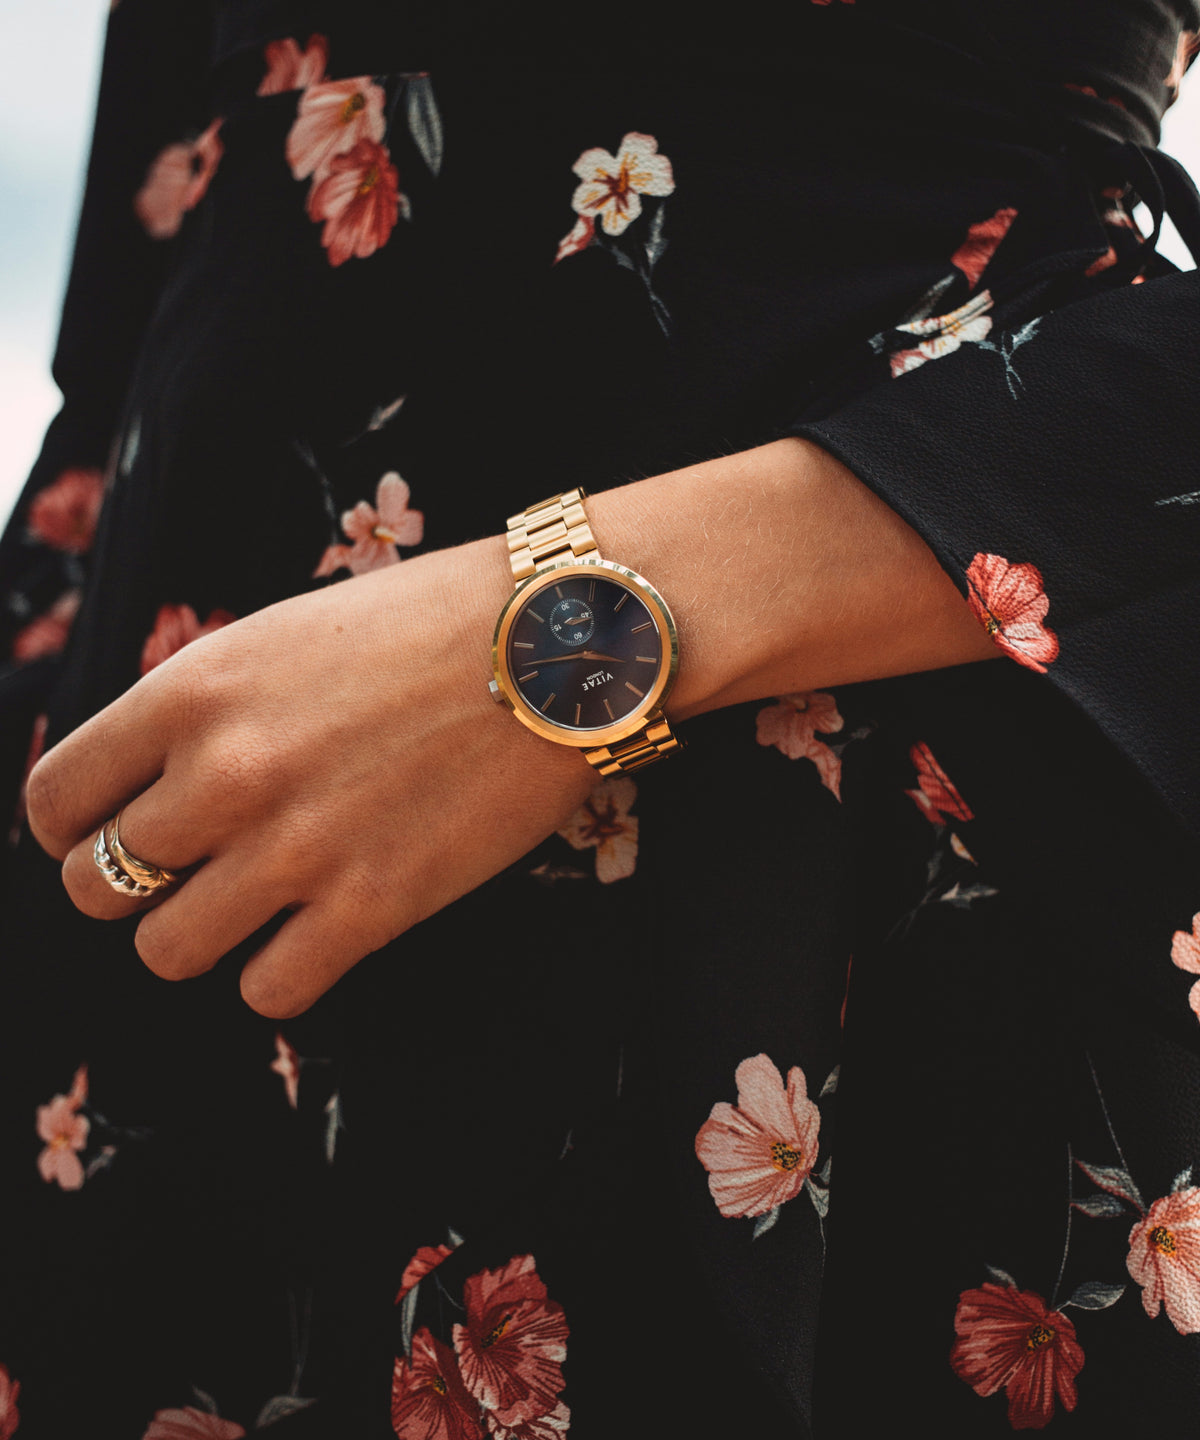 Enhacing your Look: What to Wear with a Watch